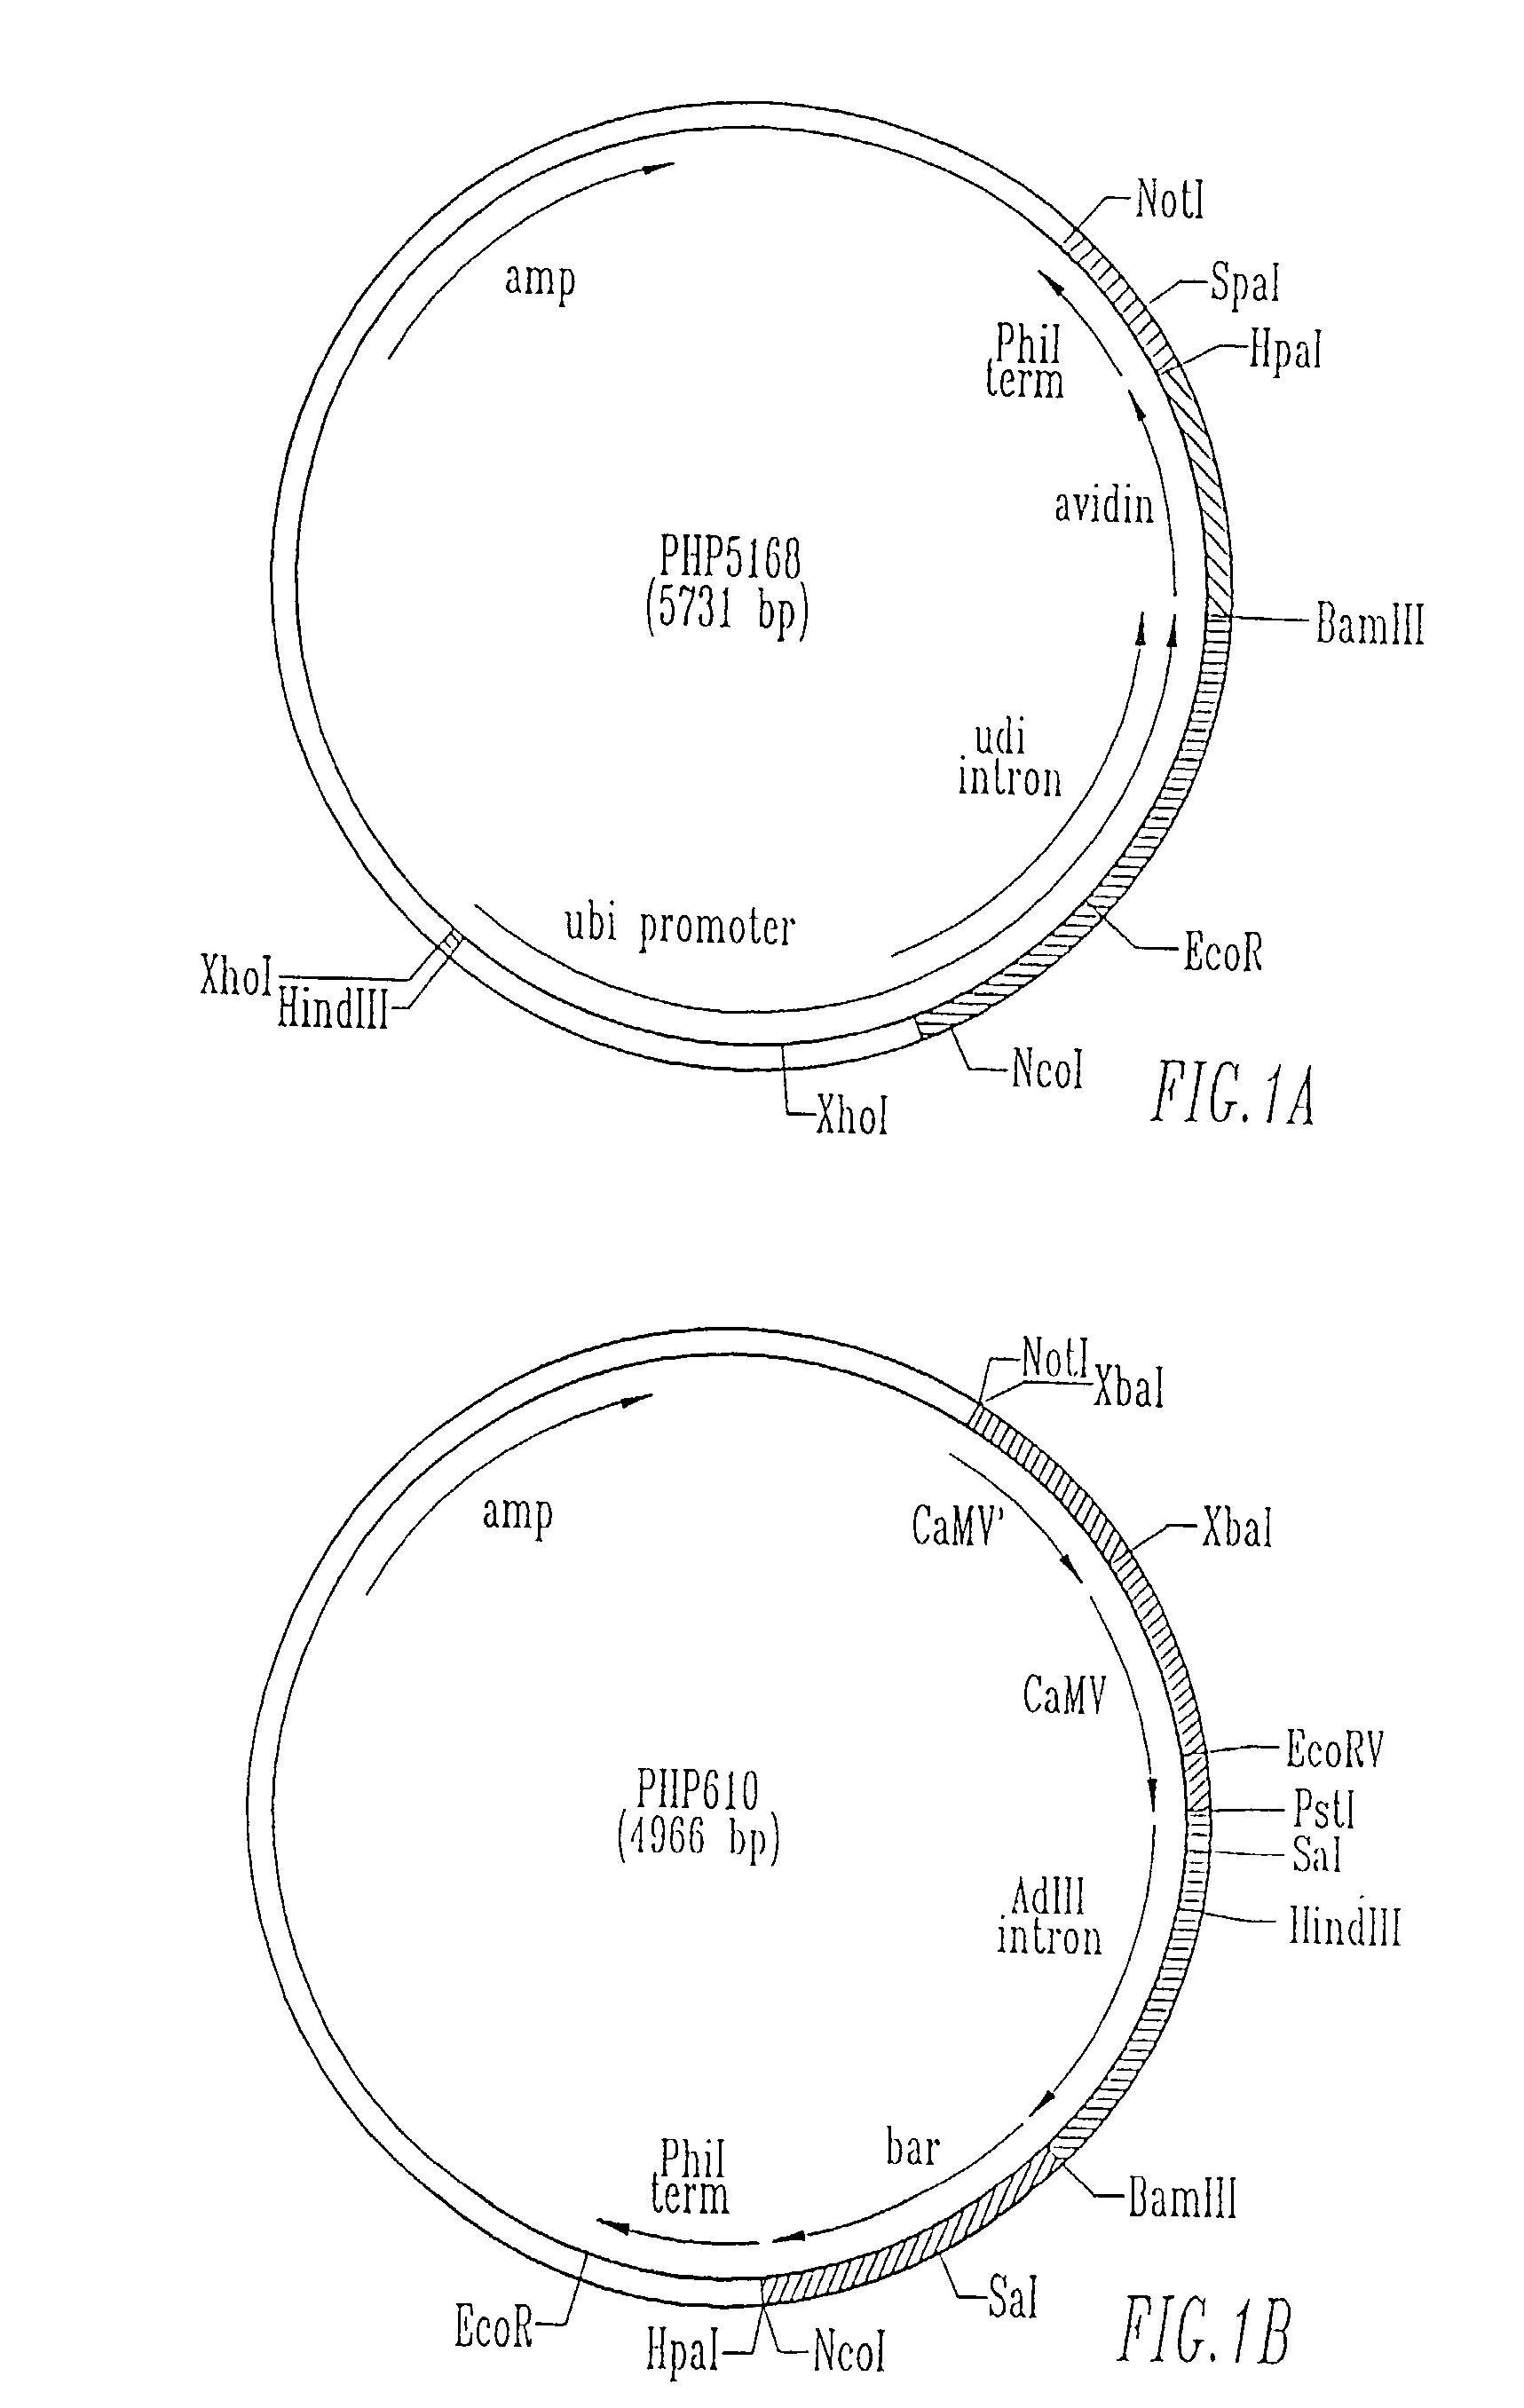 Methods for commercial production of heterologous laccase in plant tissue and extraction of the laccase from plant seed